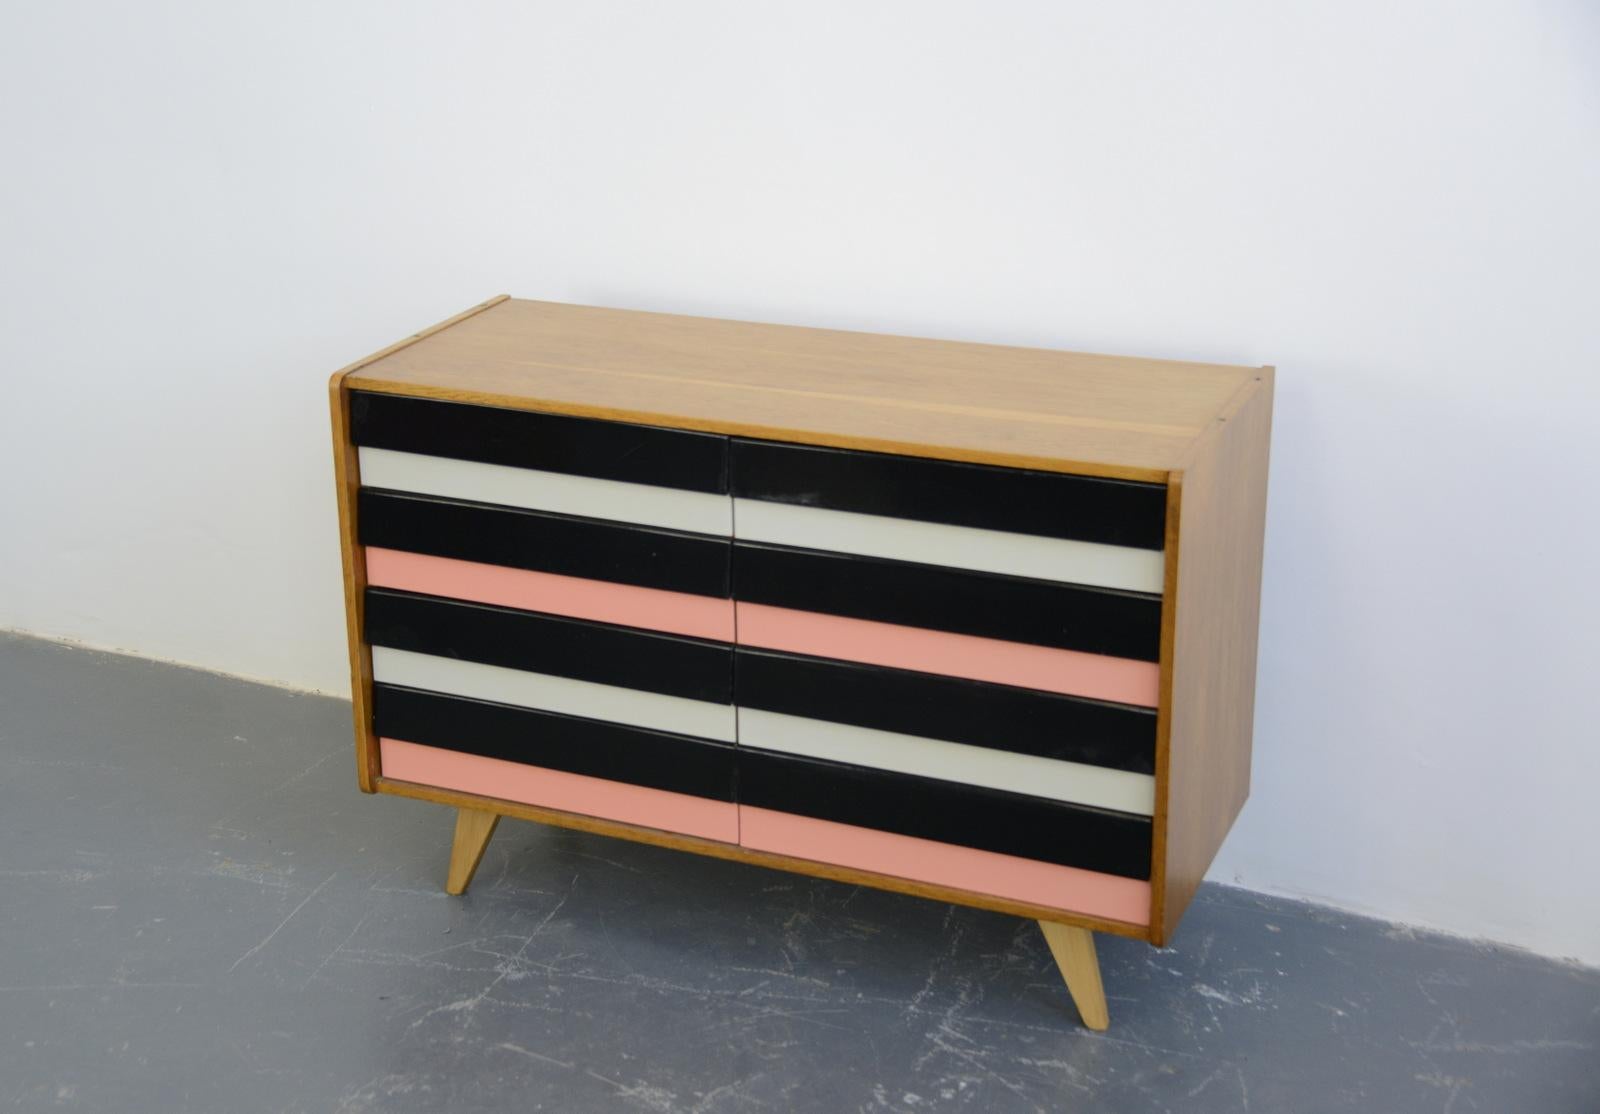 Midcentury drawers by Jiri Jiroutek for Interior Praha

- Solid oak top and sides
- 8 multicoloured drawers
- Beech atomic legs
- Design by Jiri Jiroutek 
- Made by Interior Praha
- Czech ~ 1960s
- Measures: 110cm long x 45cm deep x 76cm